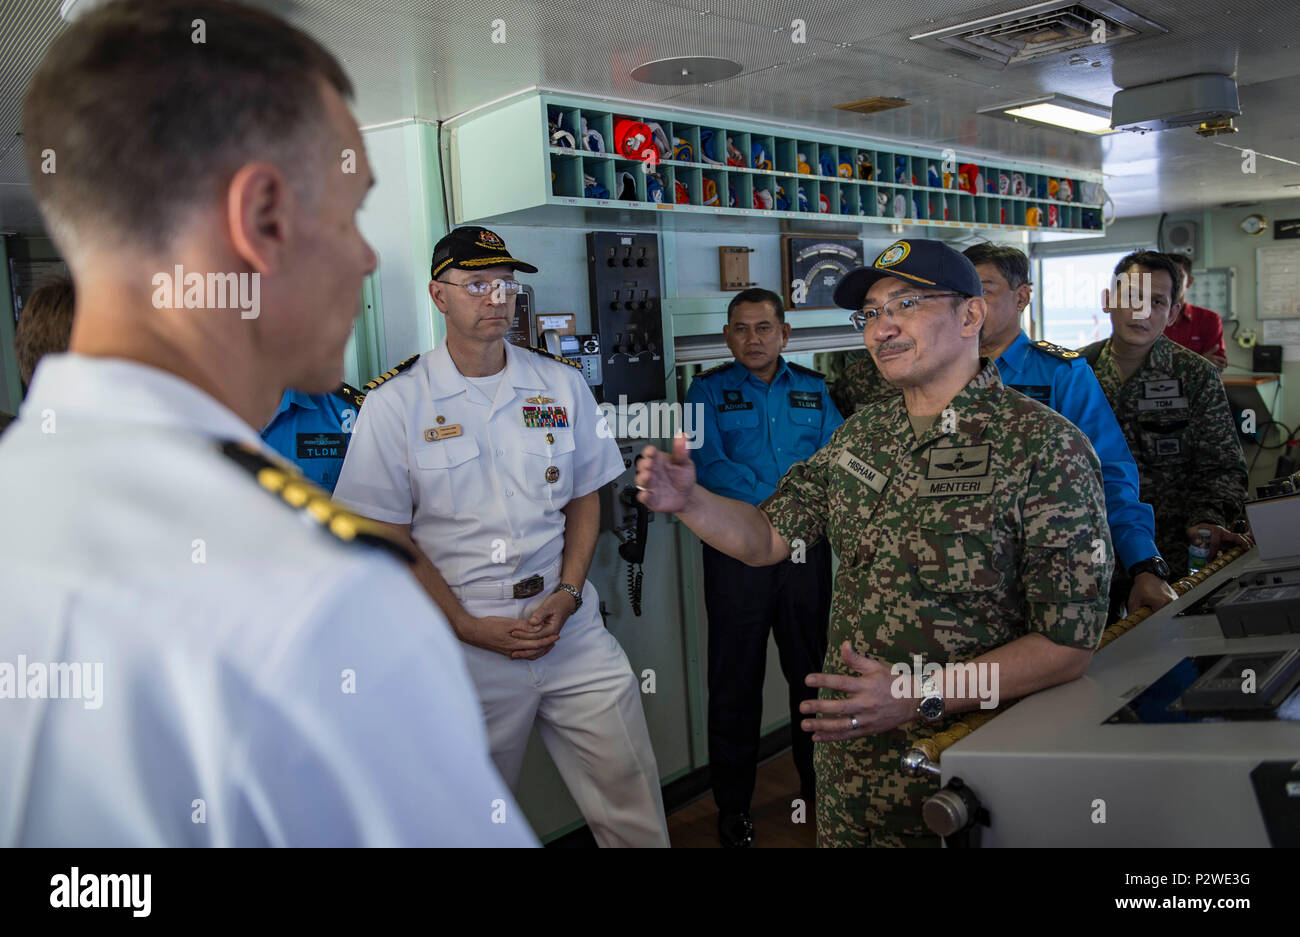 160804-N-QW941-414 KUANTAN, Malaysia (Aug 4, 2016) Dato’ Seri Hishammuddin Tun Hussein (right), Minister of Defense, Malaysia, interacts with Capt. Peter Roberts, commanding officer, Medical Treatment Facility, USNS Mercy (T-AH 19) aboard Mercy. While aboard Mercy, Hishammuddin met with Pacific Partnership personnel, toured the ship and participated in a press conference. This is the first time Mercy and Pacific Partnership have visited Malaysia. During the mission stop partner nations work side-by-side with local military and civilian organizations in a search and rescue exercise, civil engin Stock Photo